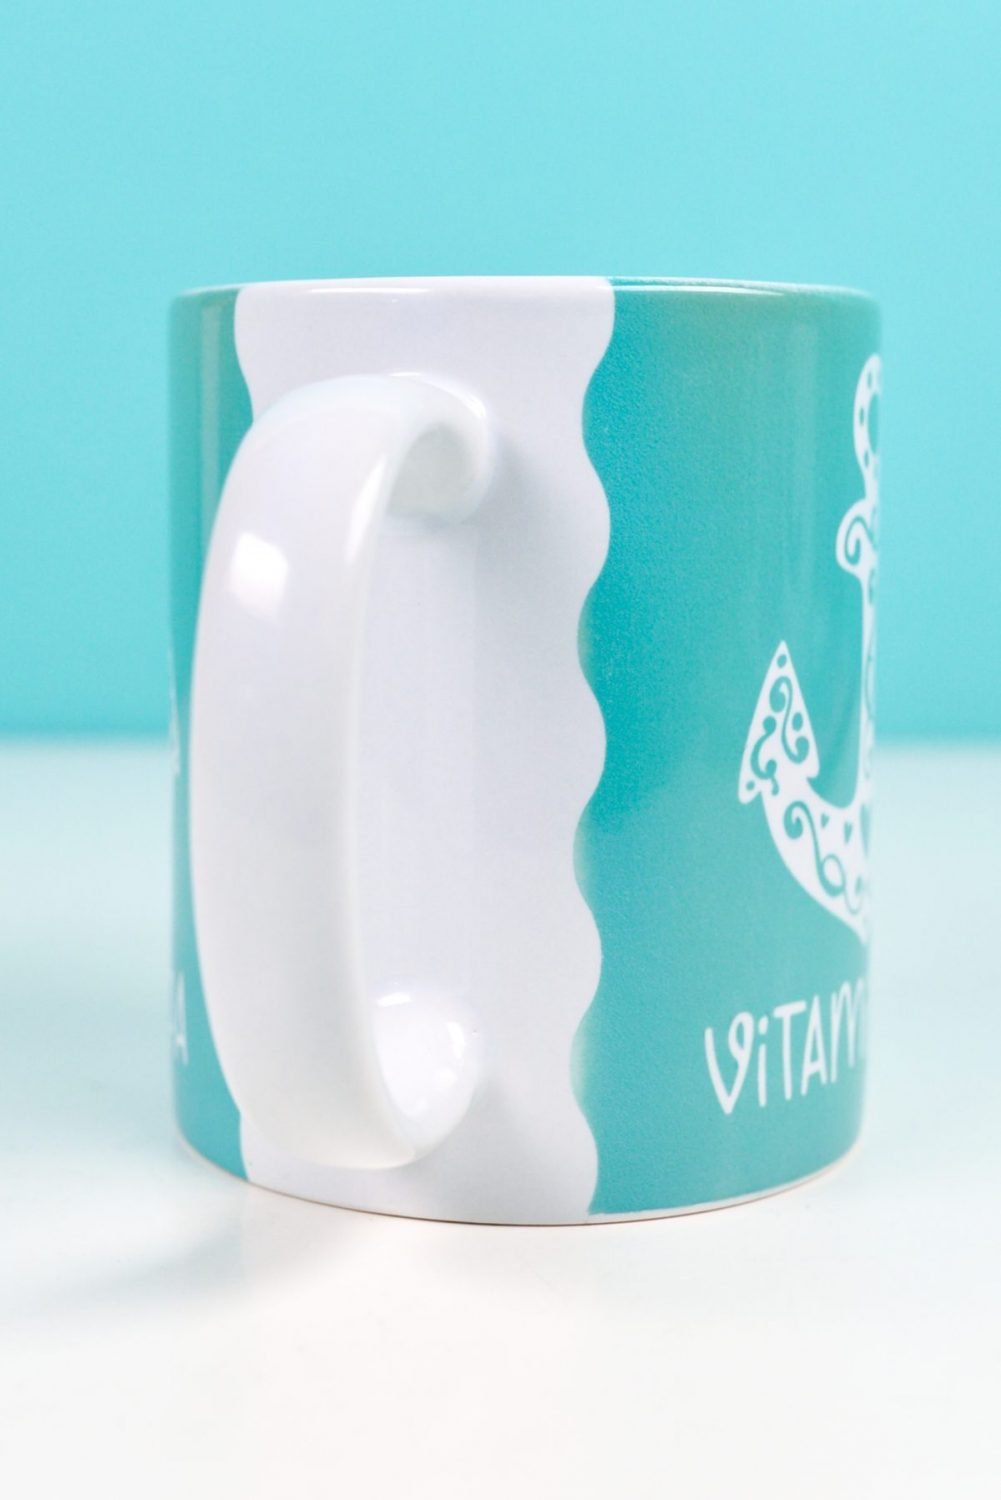 Mug showing uneven transfer by the handle